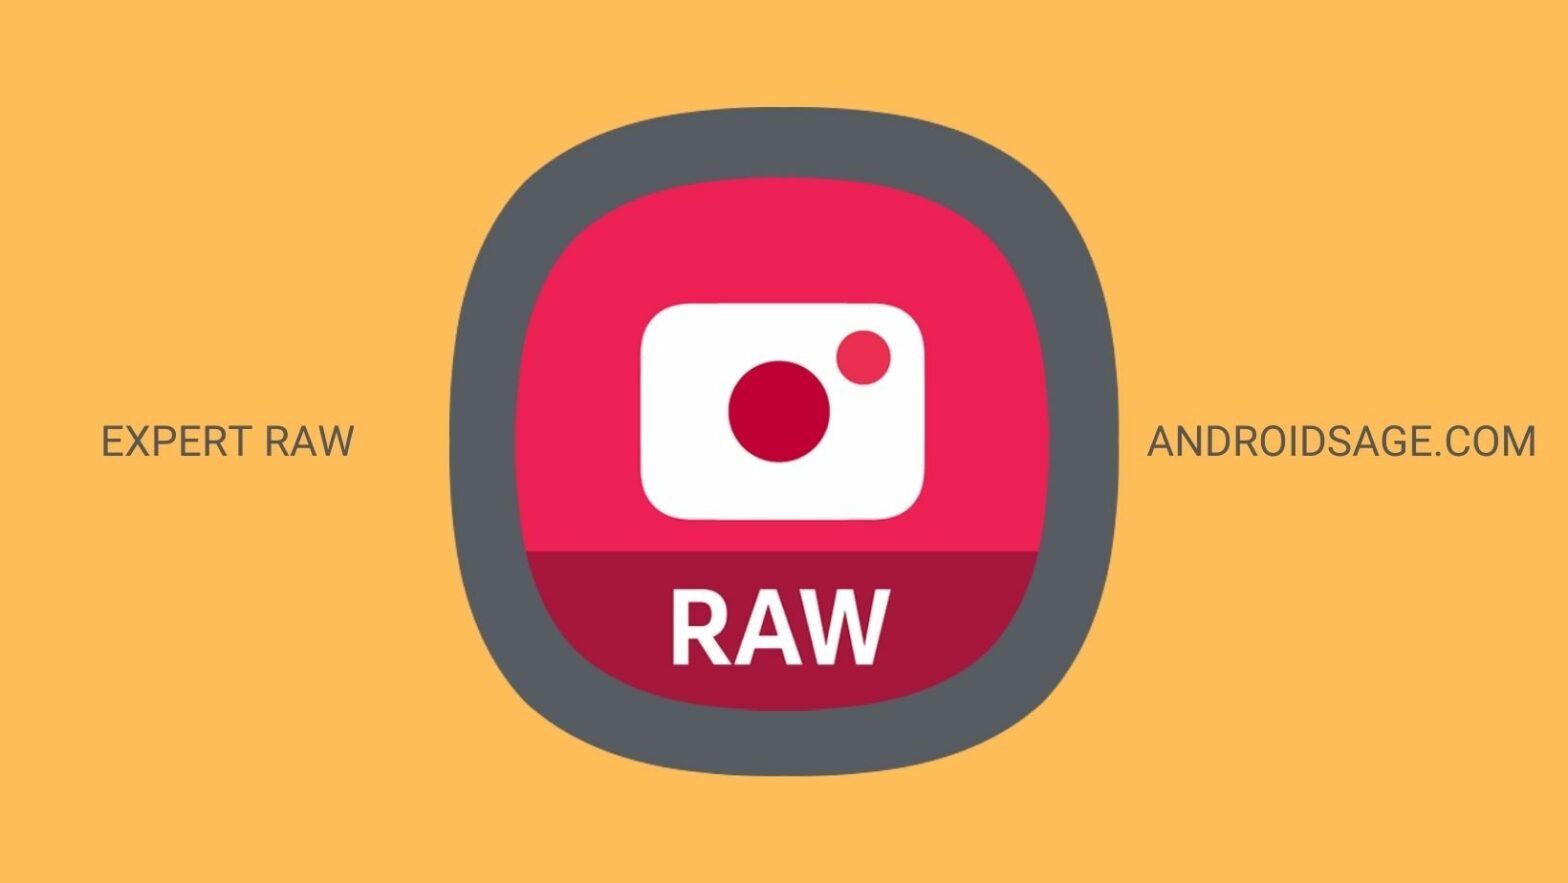 Download Expert RAW APK from Samsung Galaxy S23 Ultra